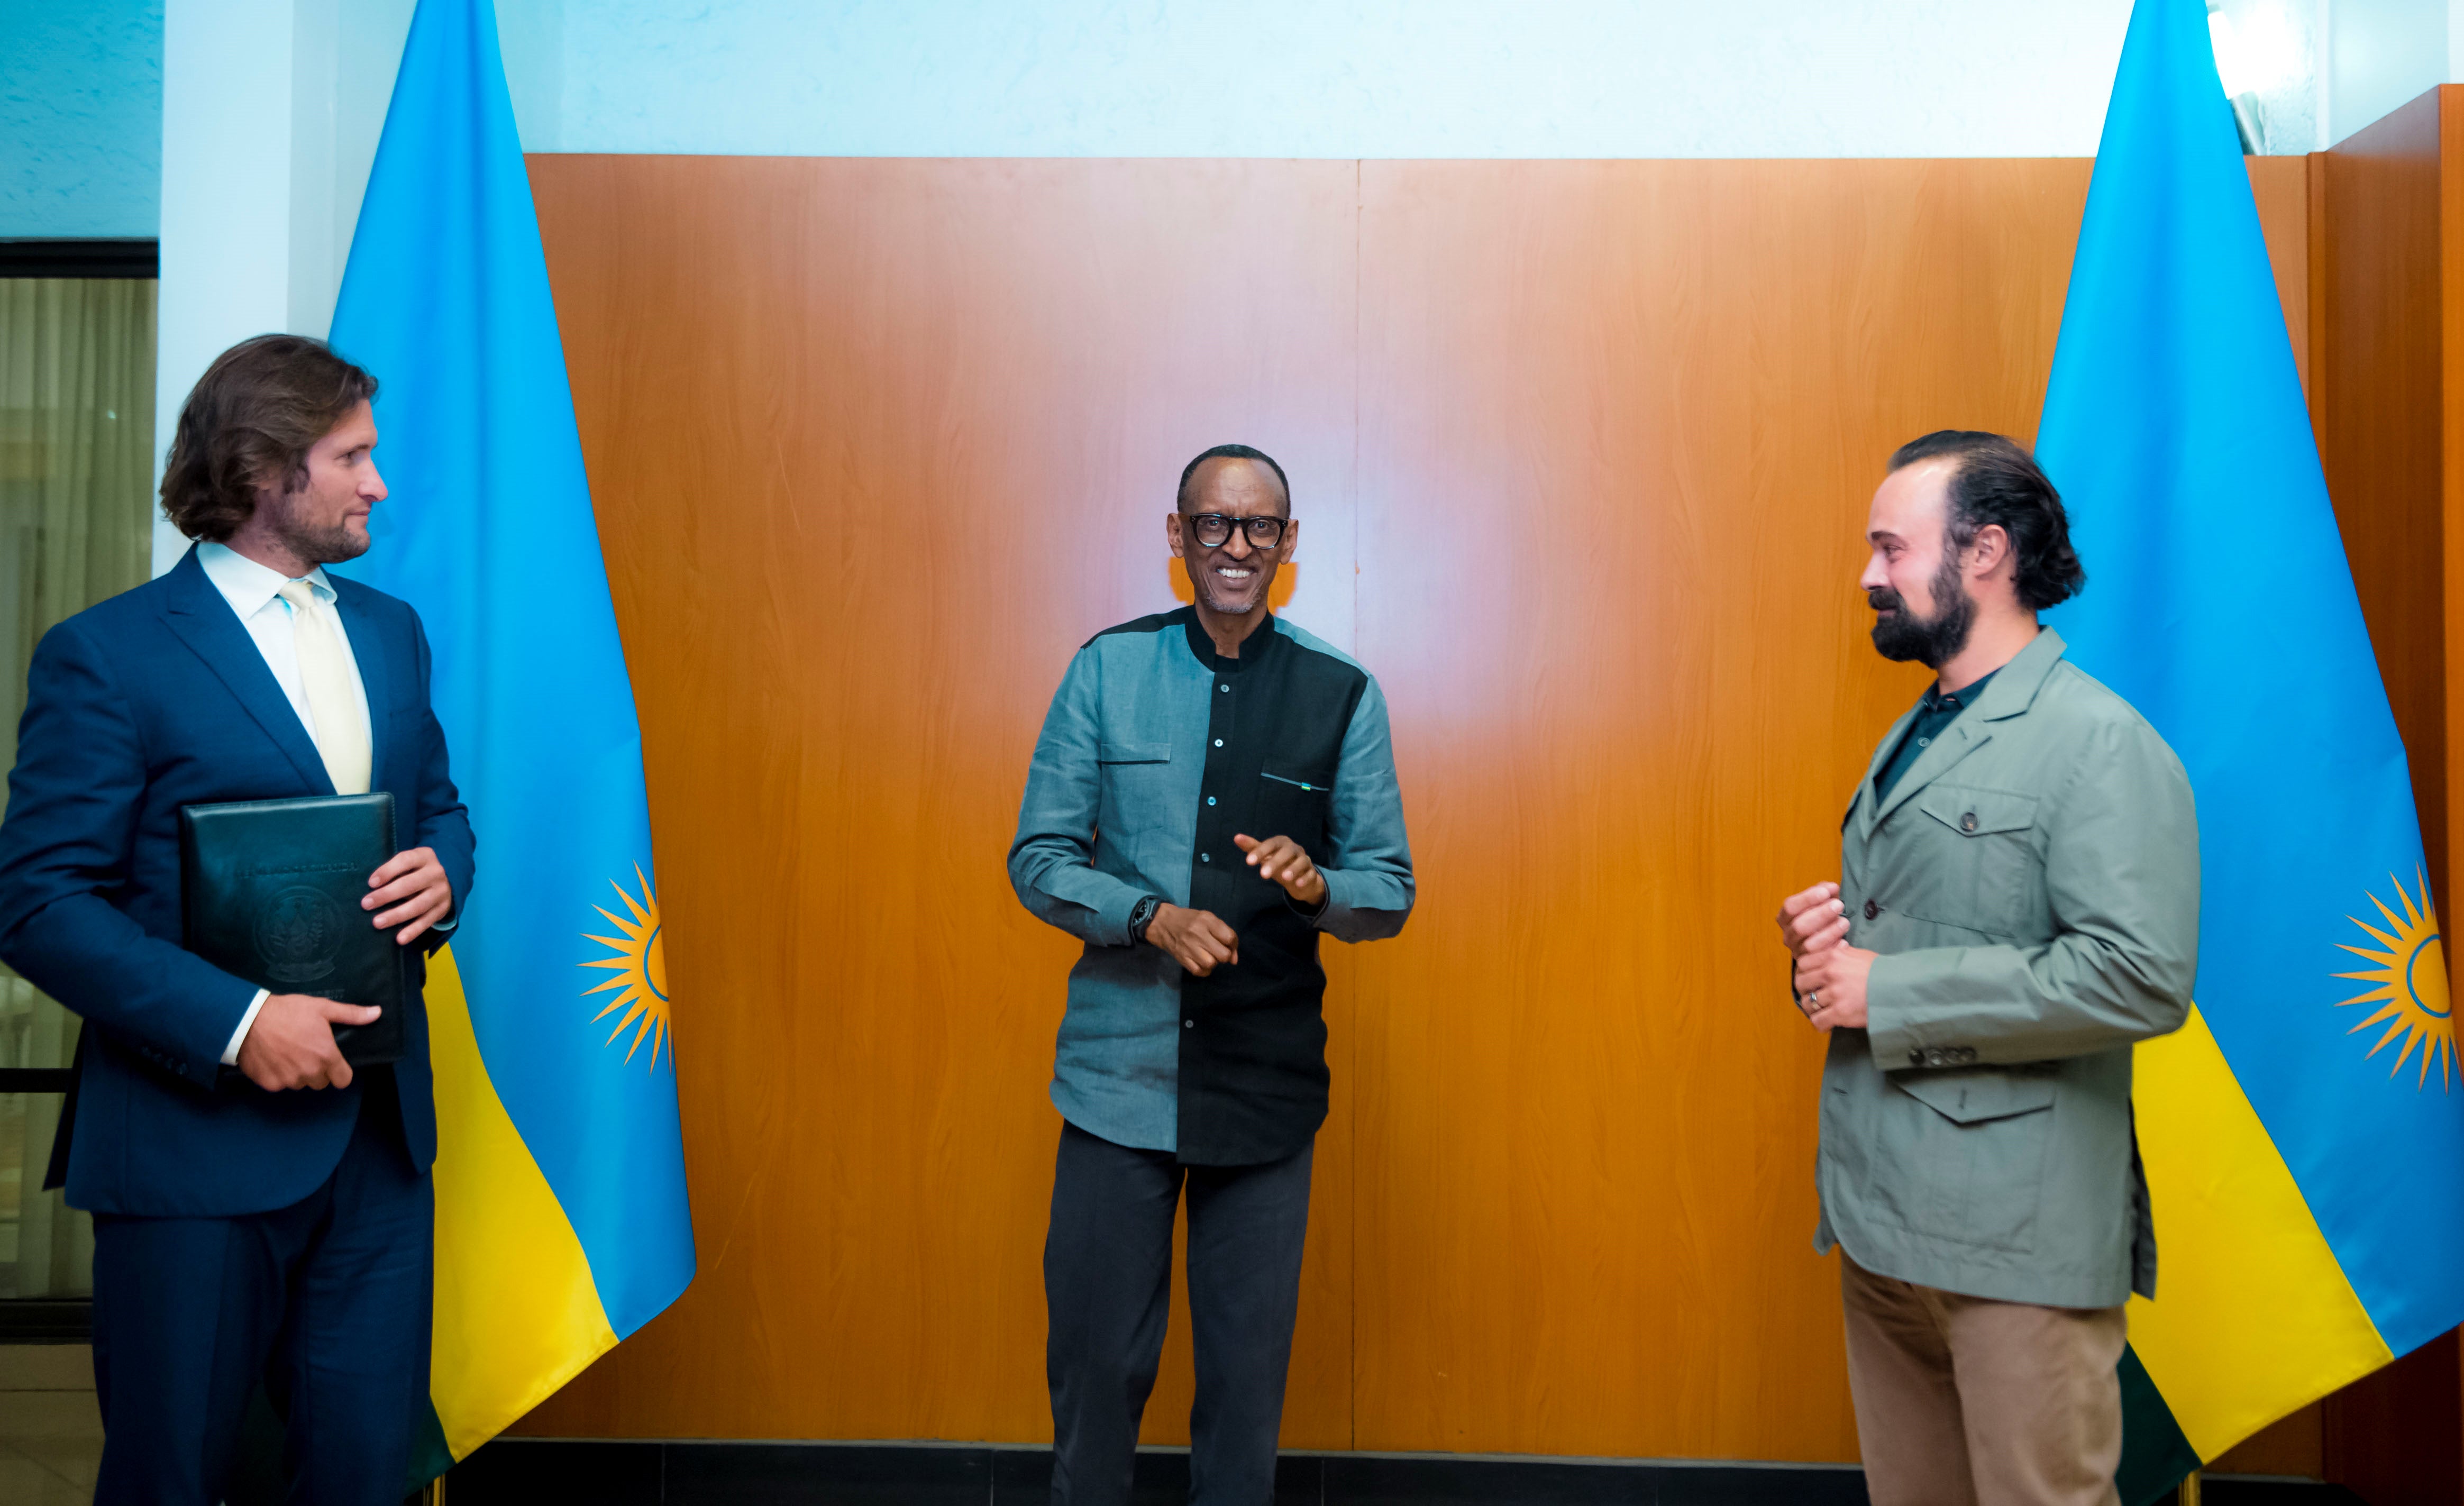 Evgeny Lebedev and Dr Max Graham with Paul Kagame in Kigali